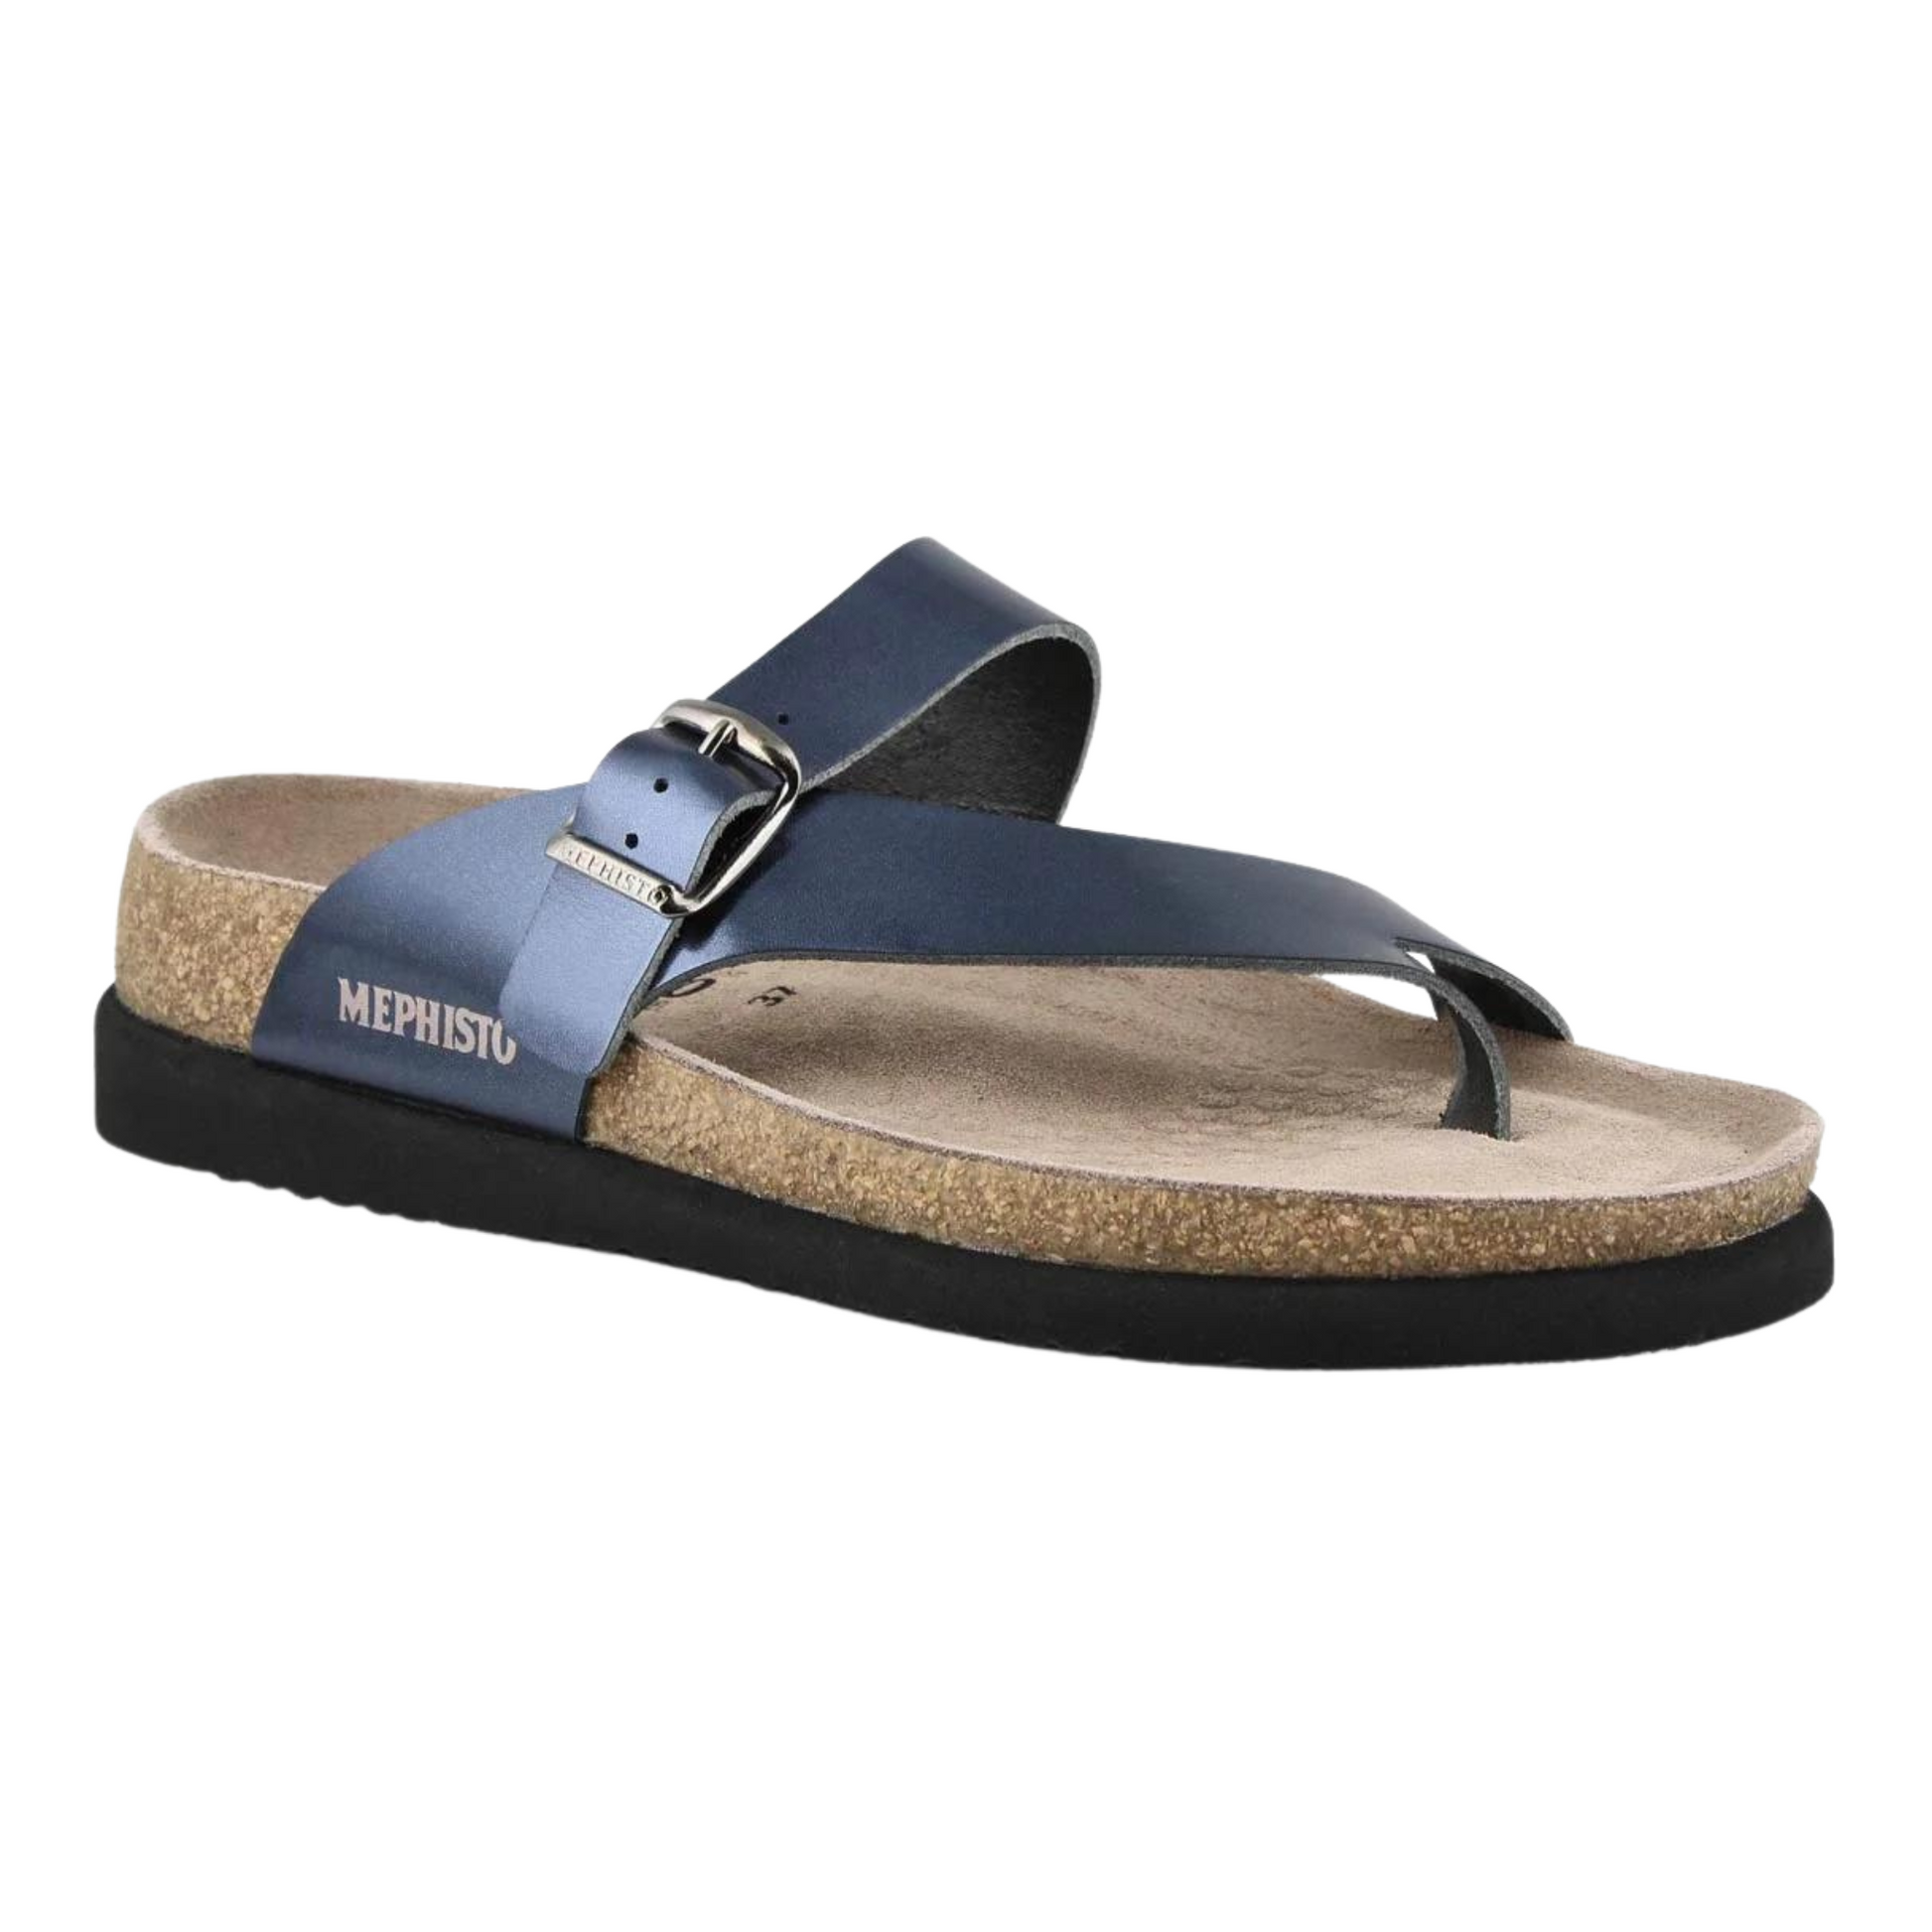 A right angle view of a cork sandal with a shiny navy leather strap and toe loop, silver buckle, and light brown suede footbed.